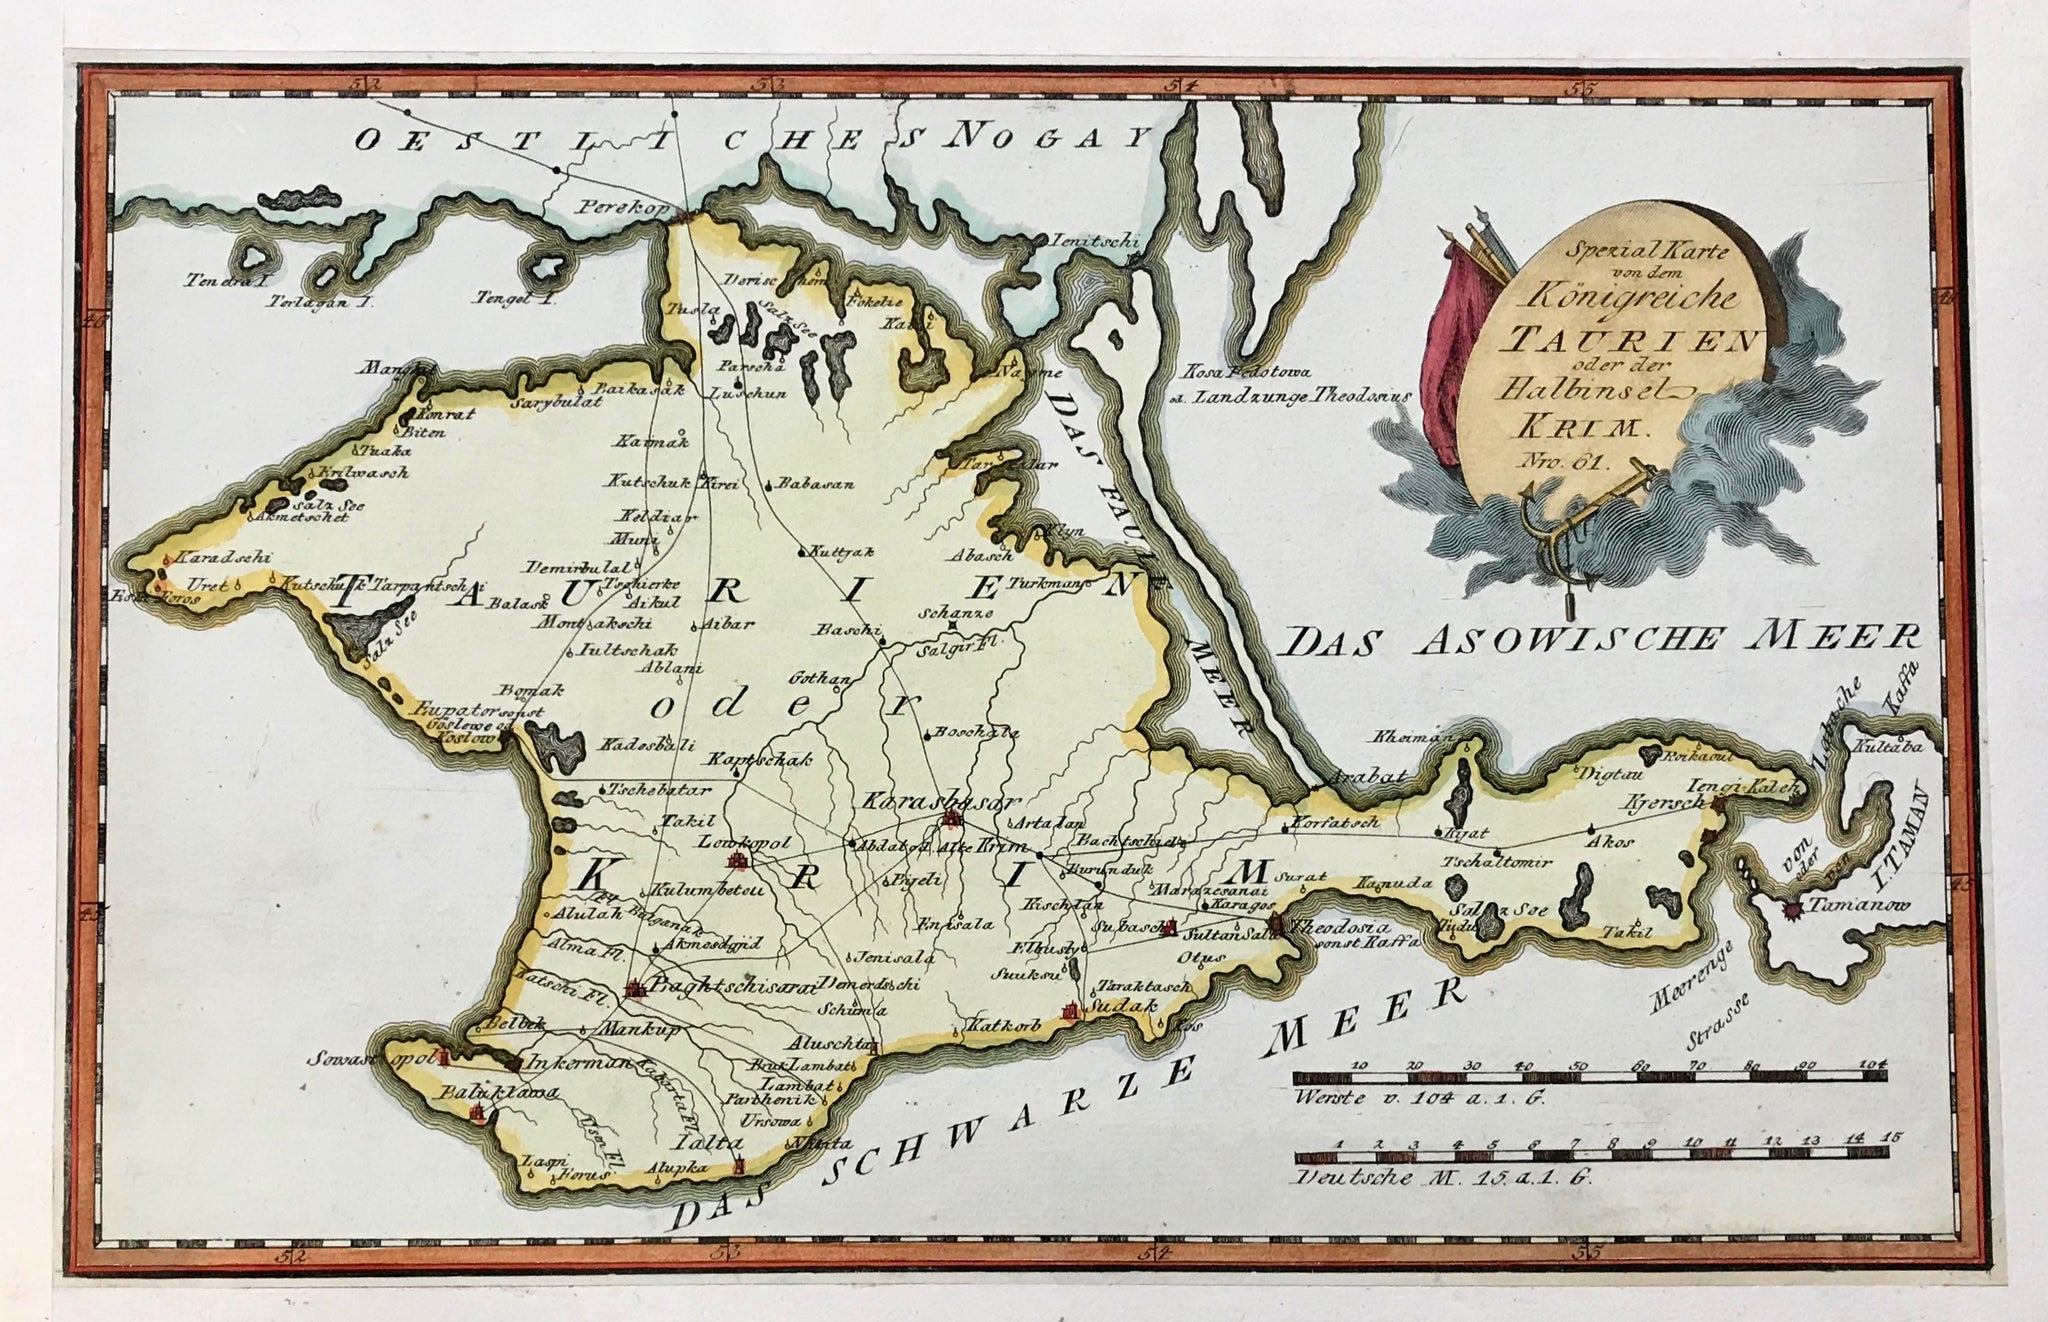 "Spezial Karte von dem Koenigreiche Taurien oder der Halbinsel Krim" Copper engraving for Reilly's Postal Atlas, 1791. Fine, modern hand coloring.  Fine map showing the postal routes of the time.  The margins have been added. Clean image. Strong impression.  20.7 x 32.5 cm ( 8.1 x 12.7 ")